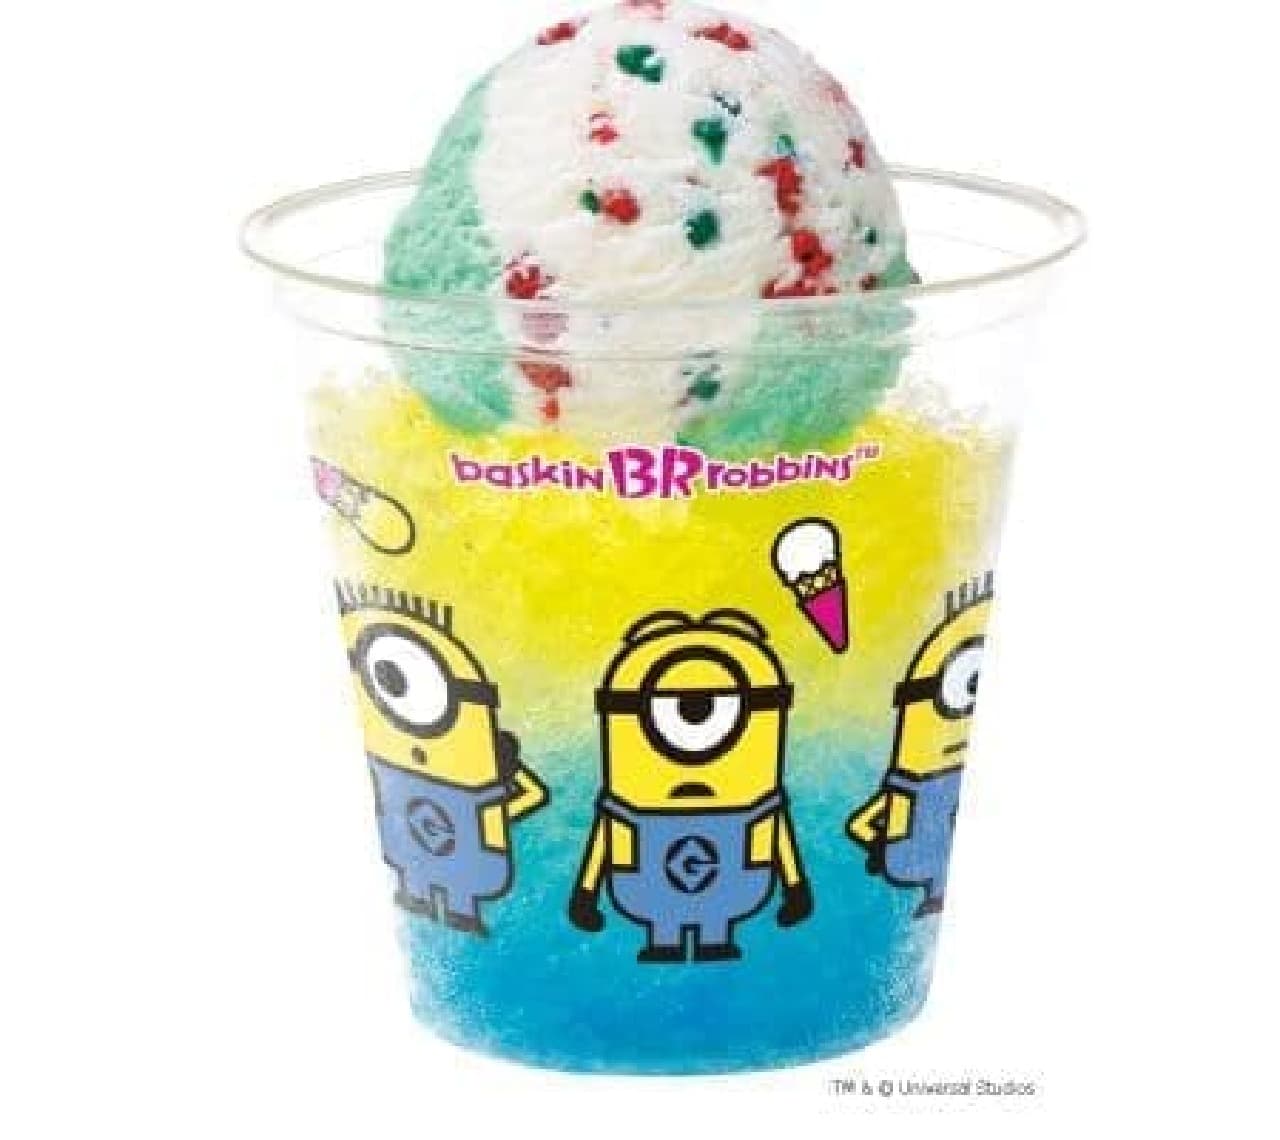 "Crush Ice Minions" is "Grape & Muscat" is shaved ice that you can enjoy both grape and muscat flavors at the same time.